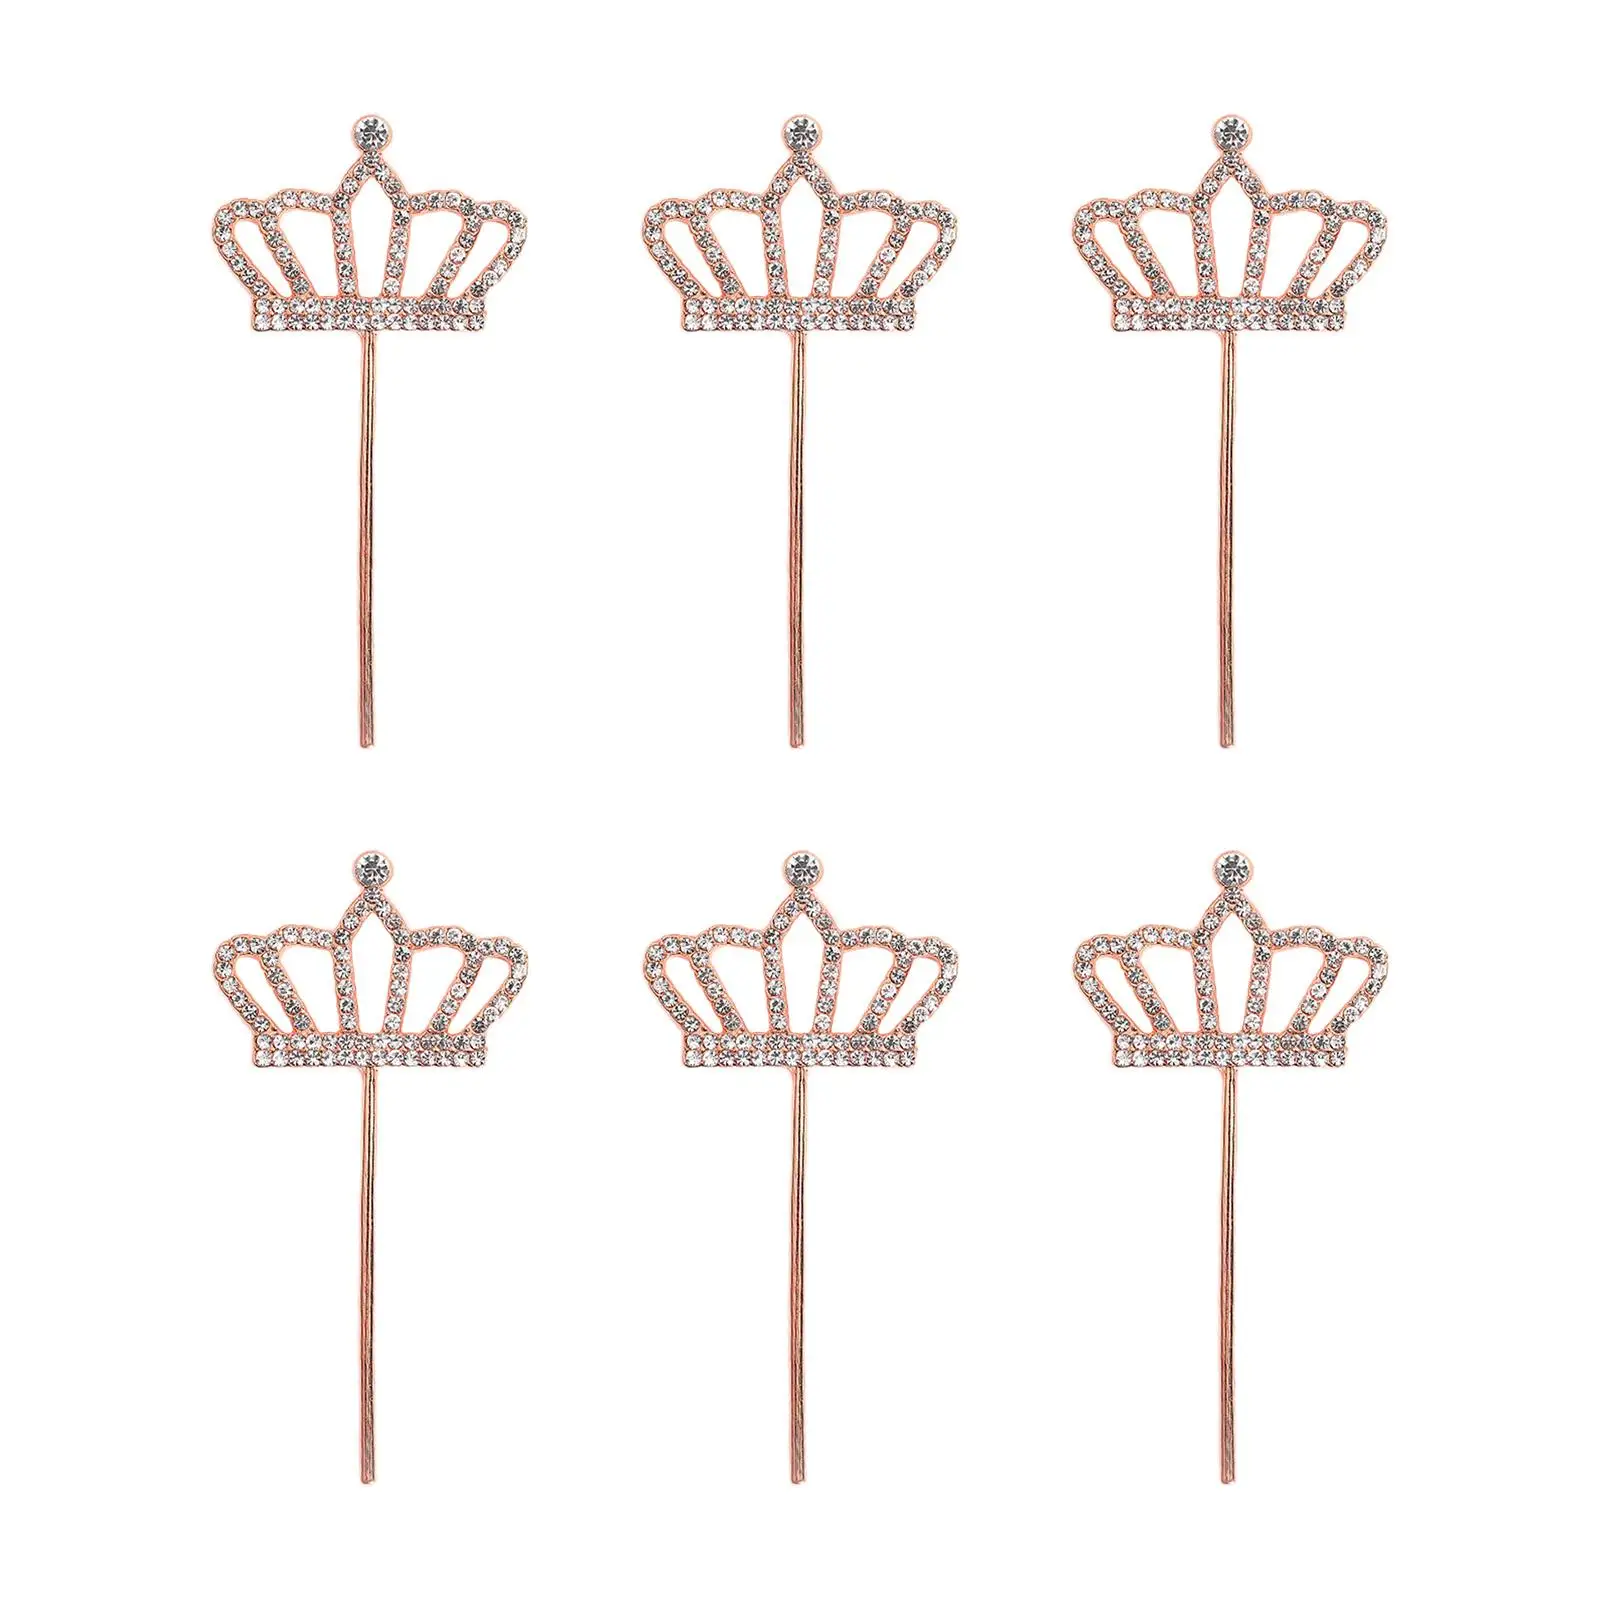 Princess Crown Cake Cards Reusable for Dessert Birthday Housewarming Booth Props